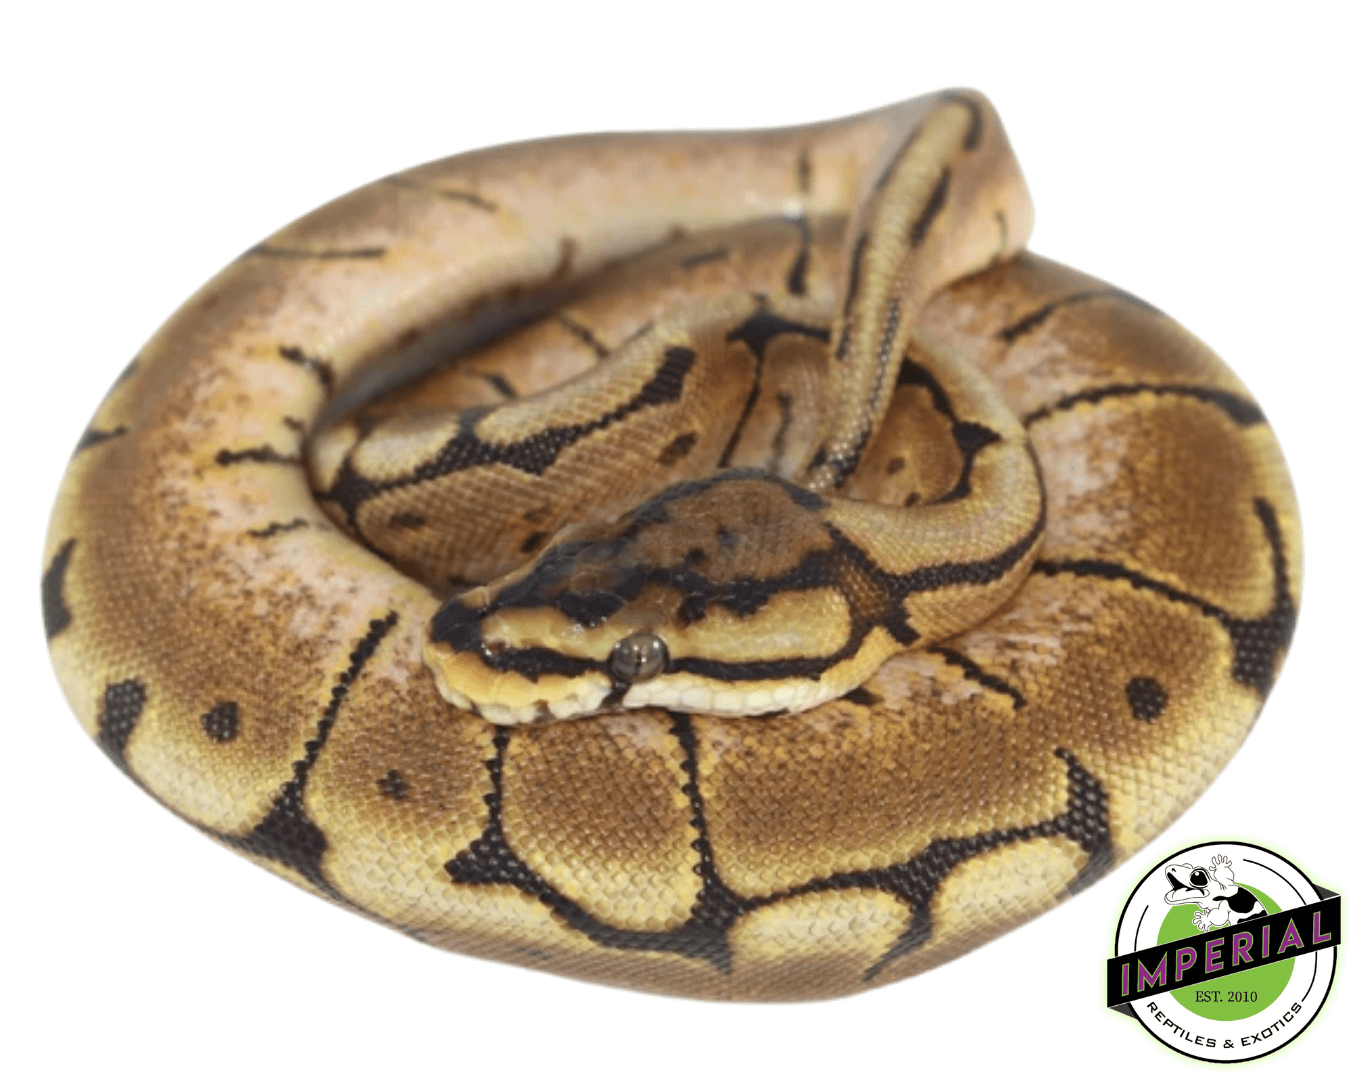 spider ball python for sale, buy reptiles online